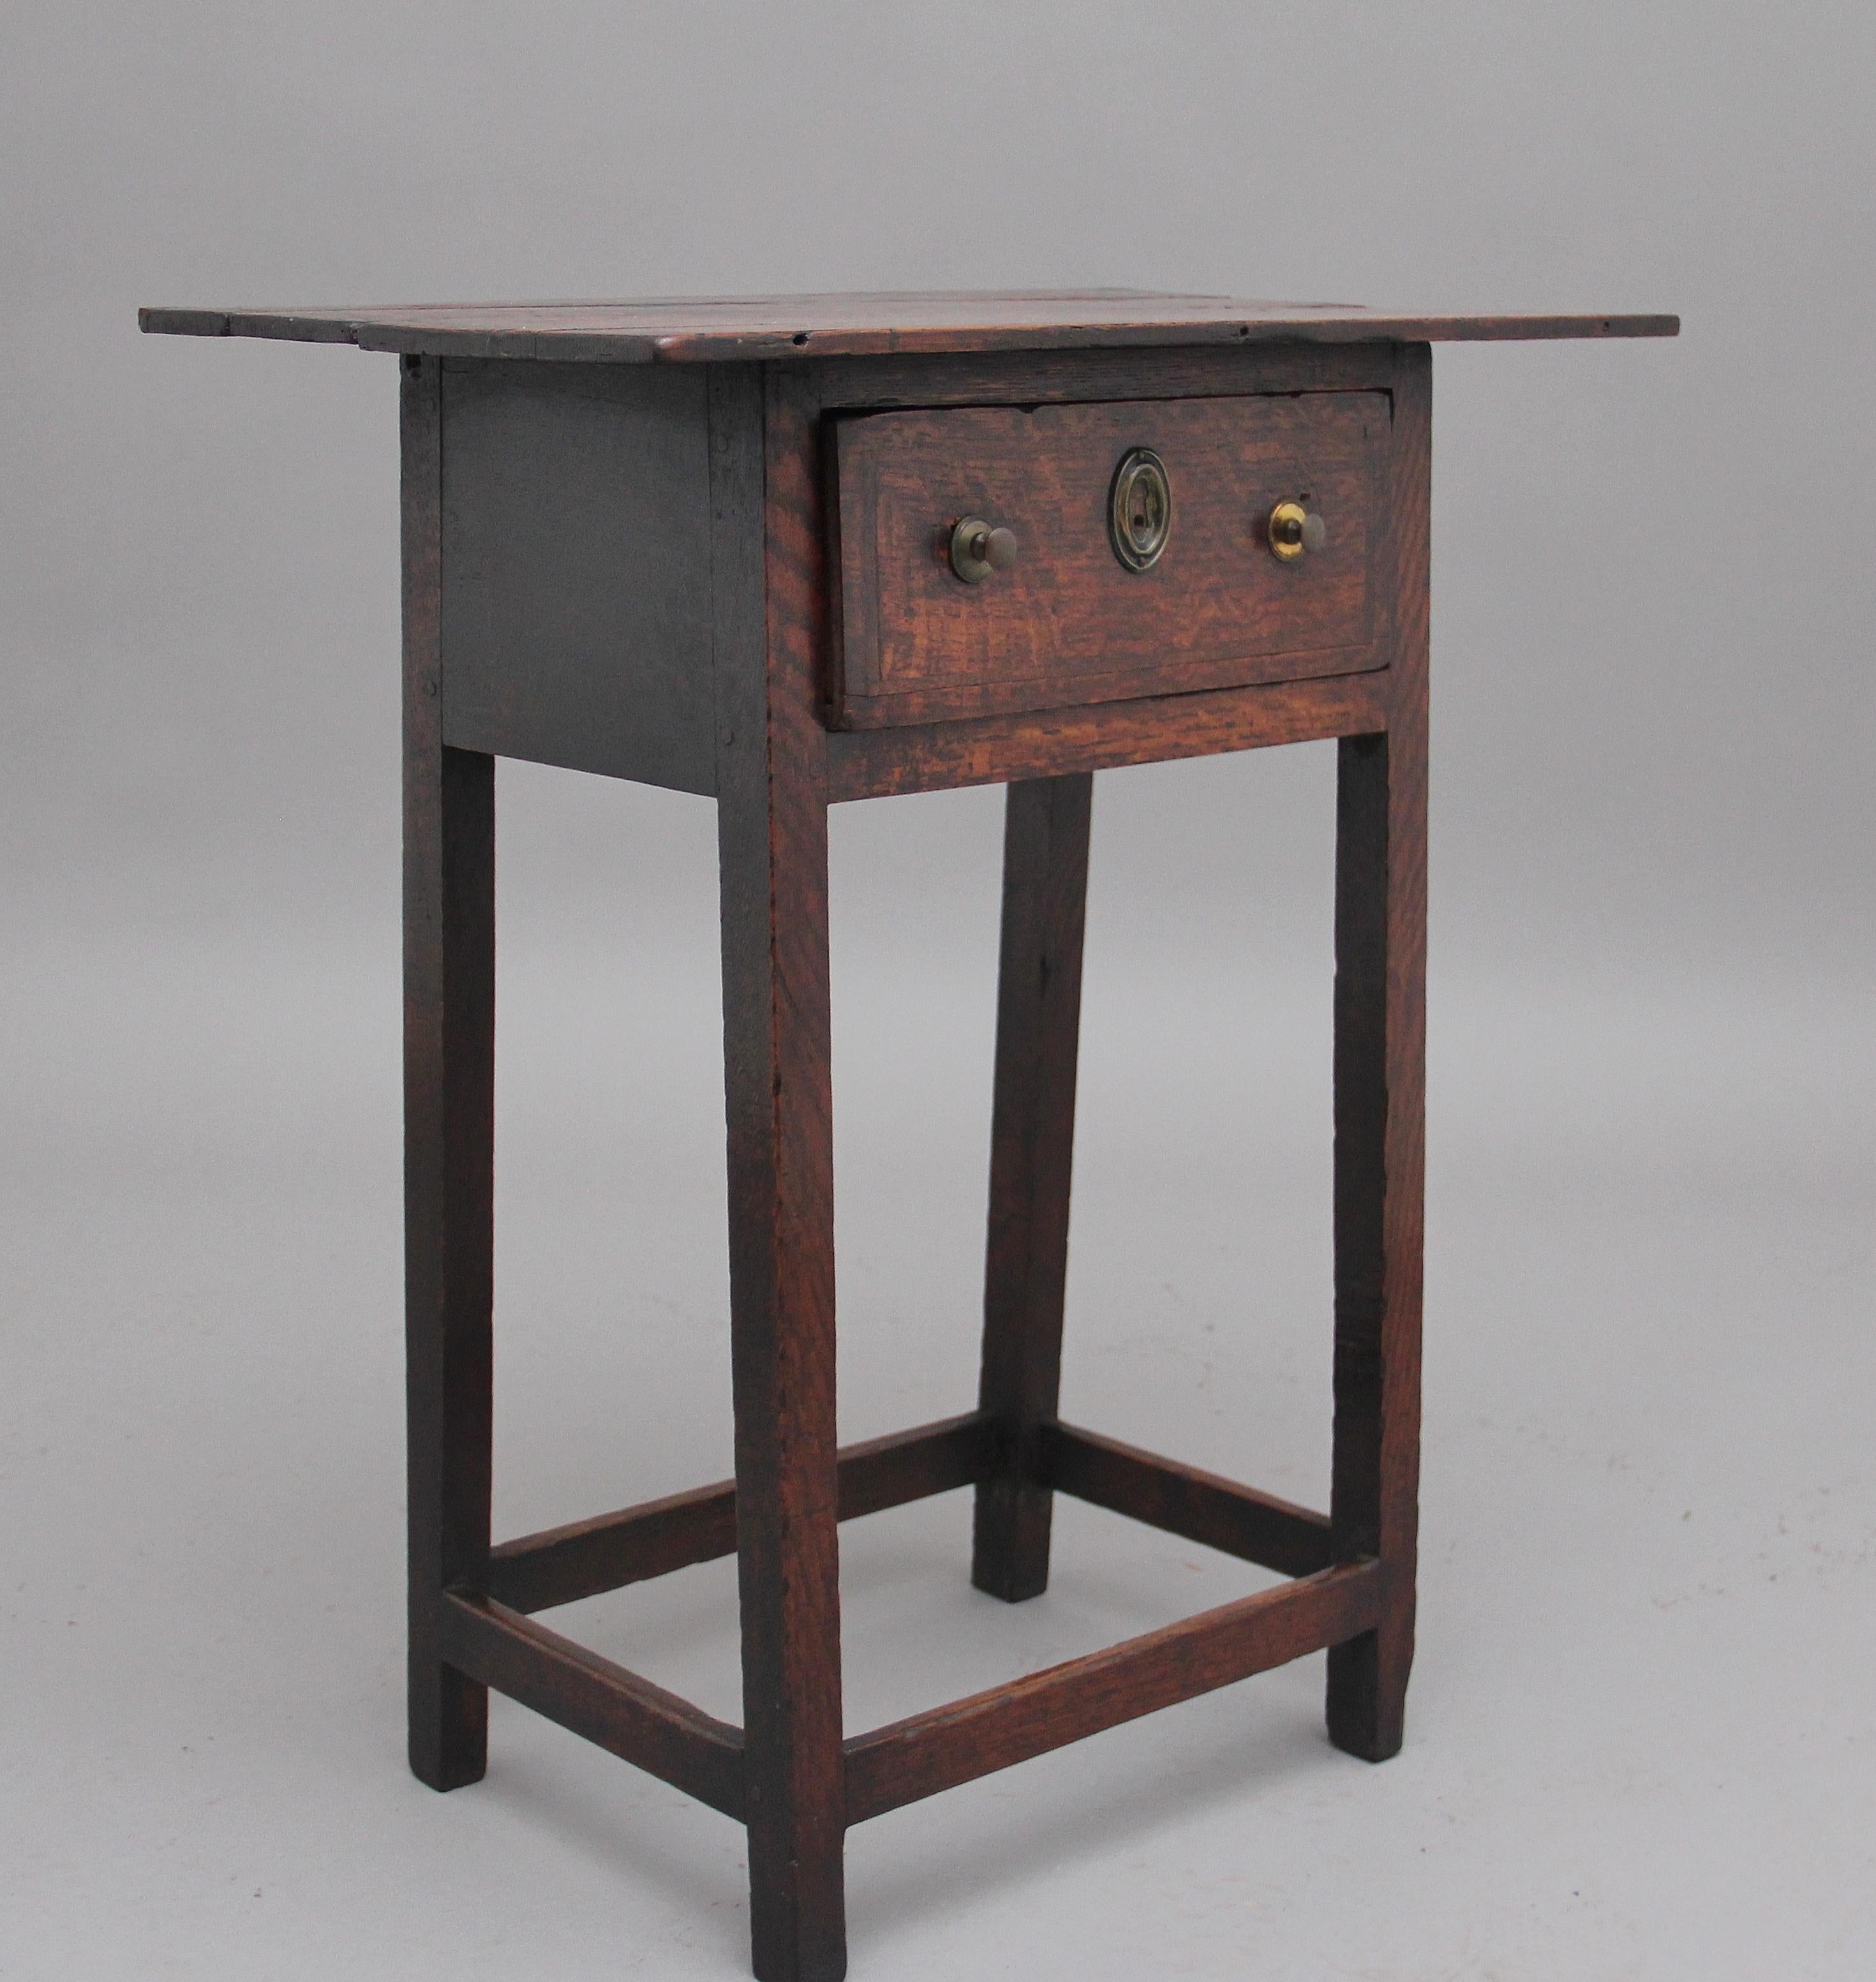 Early 19th century country oak side table, the rustic top above a single frieze drawer with brass knob handles and escutcheons, supported on square legs united by a stretcher, Circa 1810.